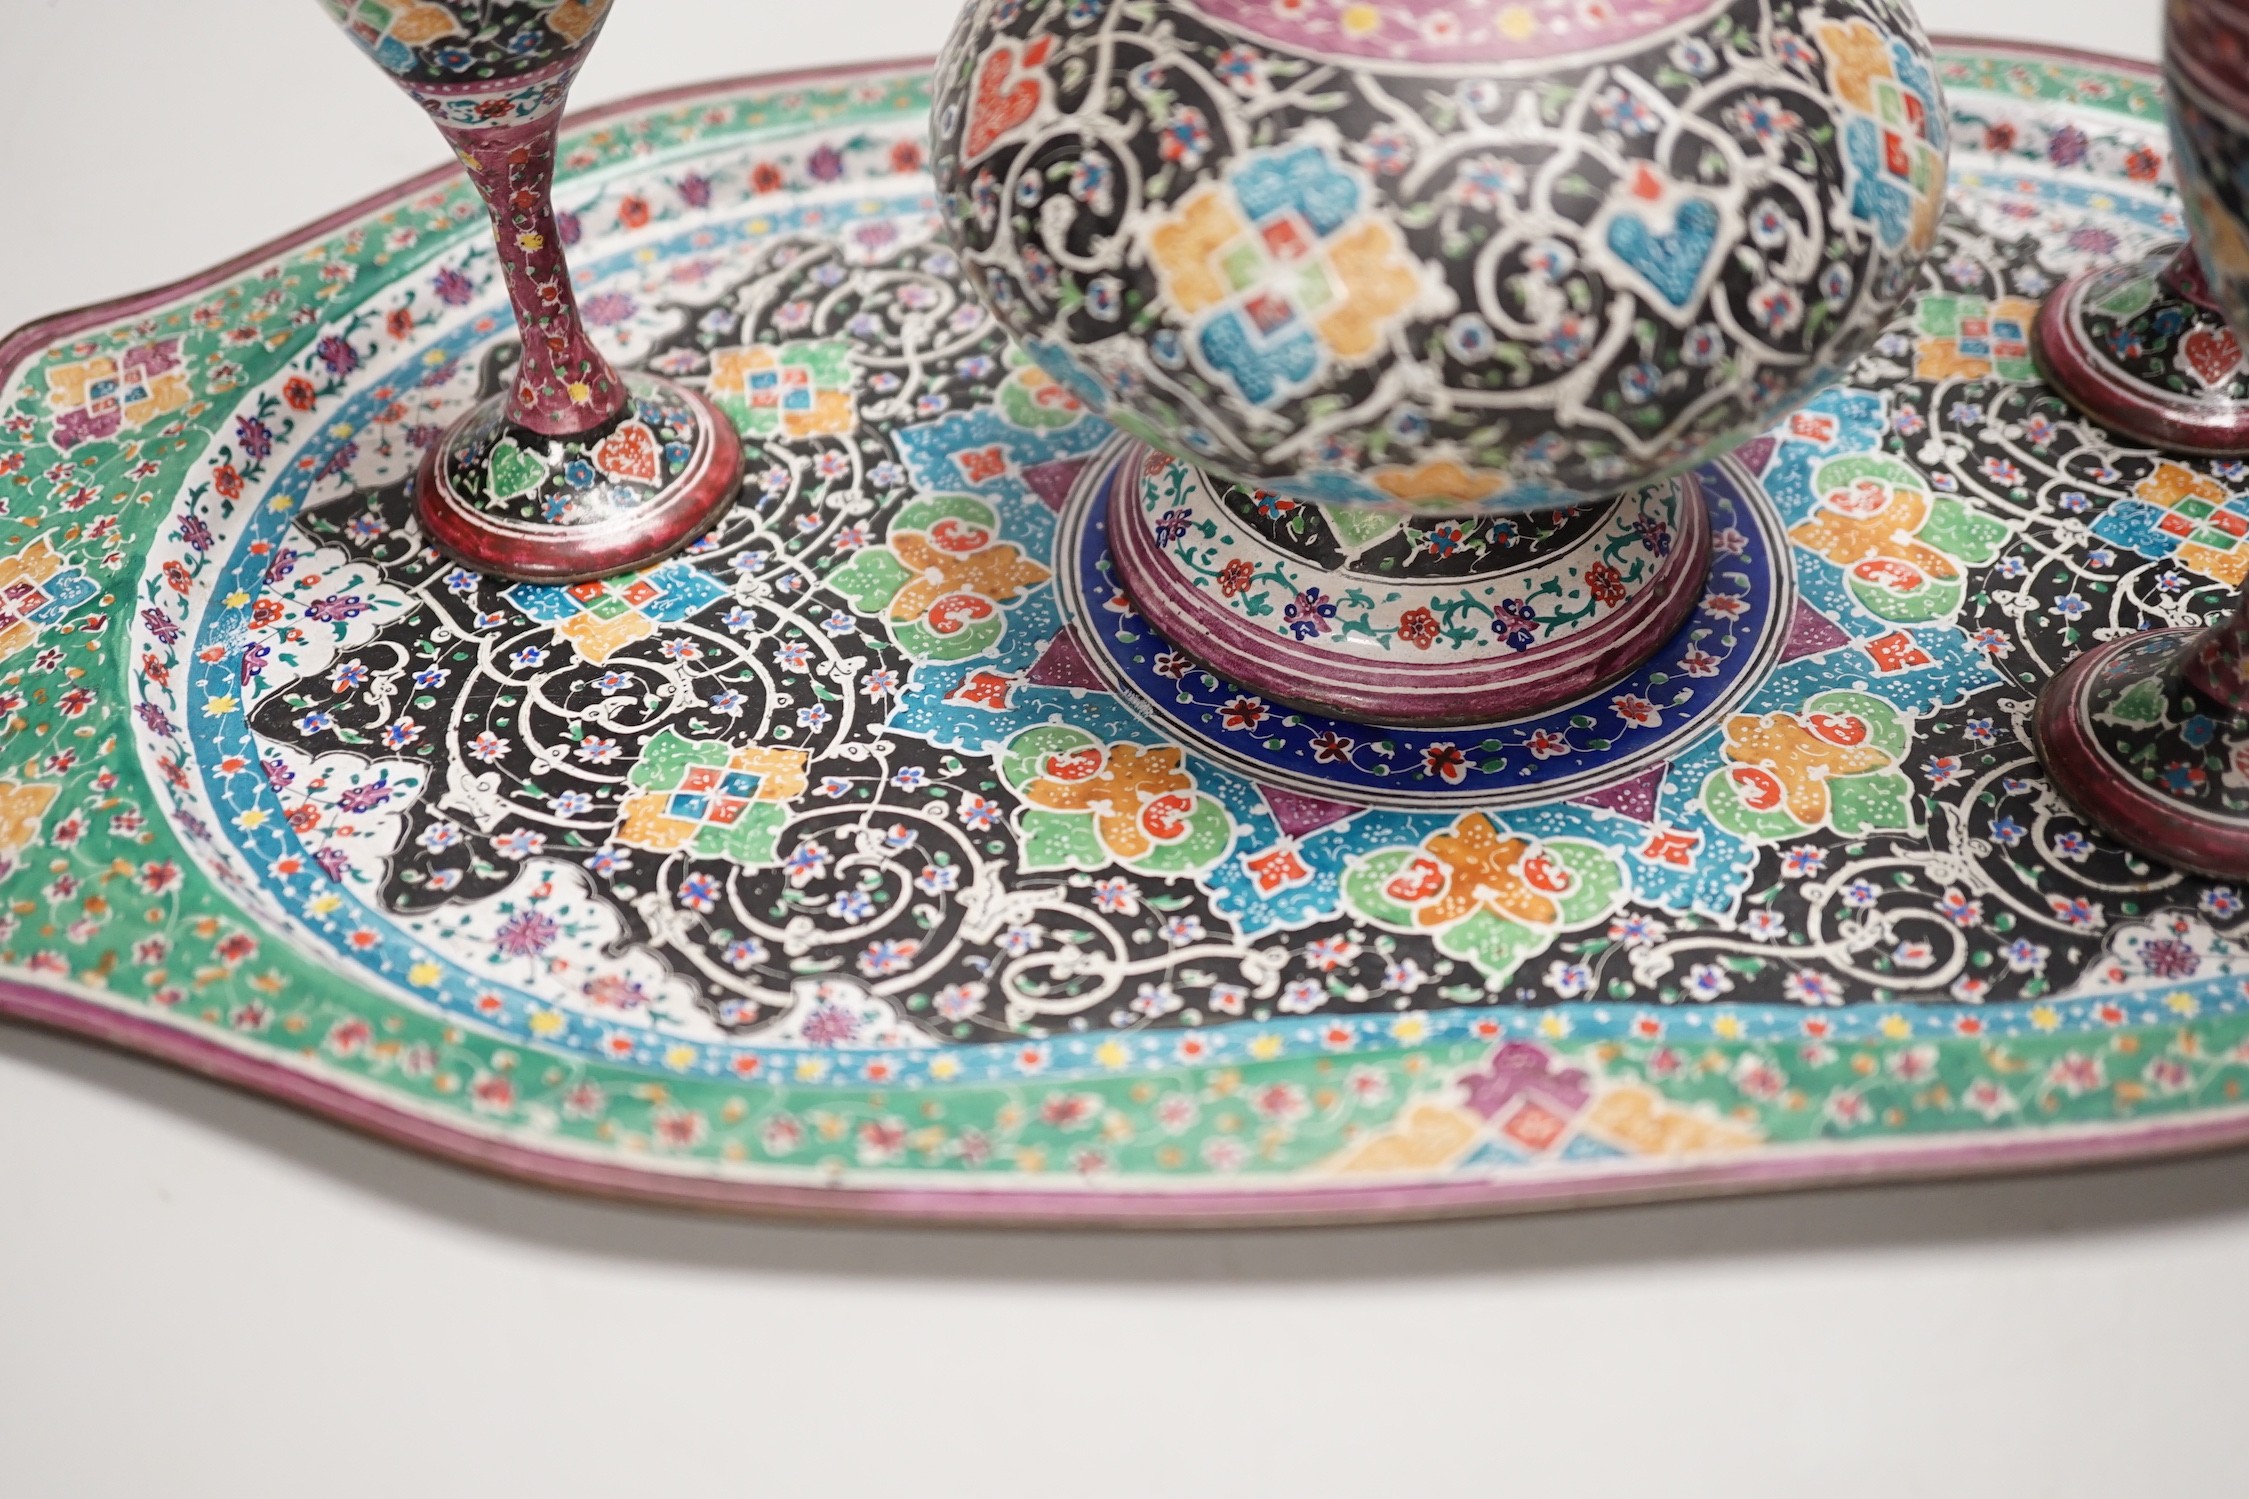 A decorative Persian enamel on copper set on stand. Tallest piece 20cm - Image 5 of 5